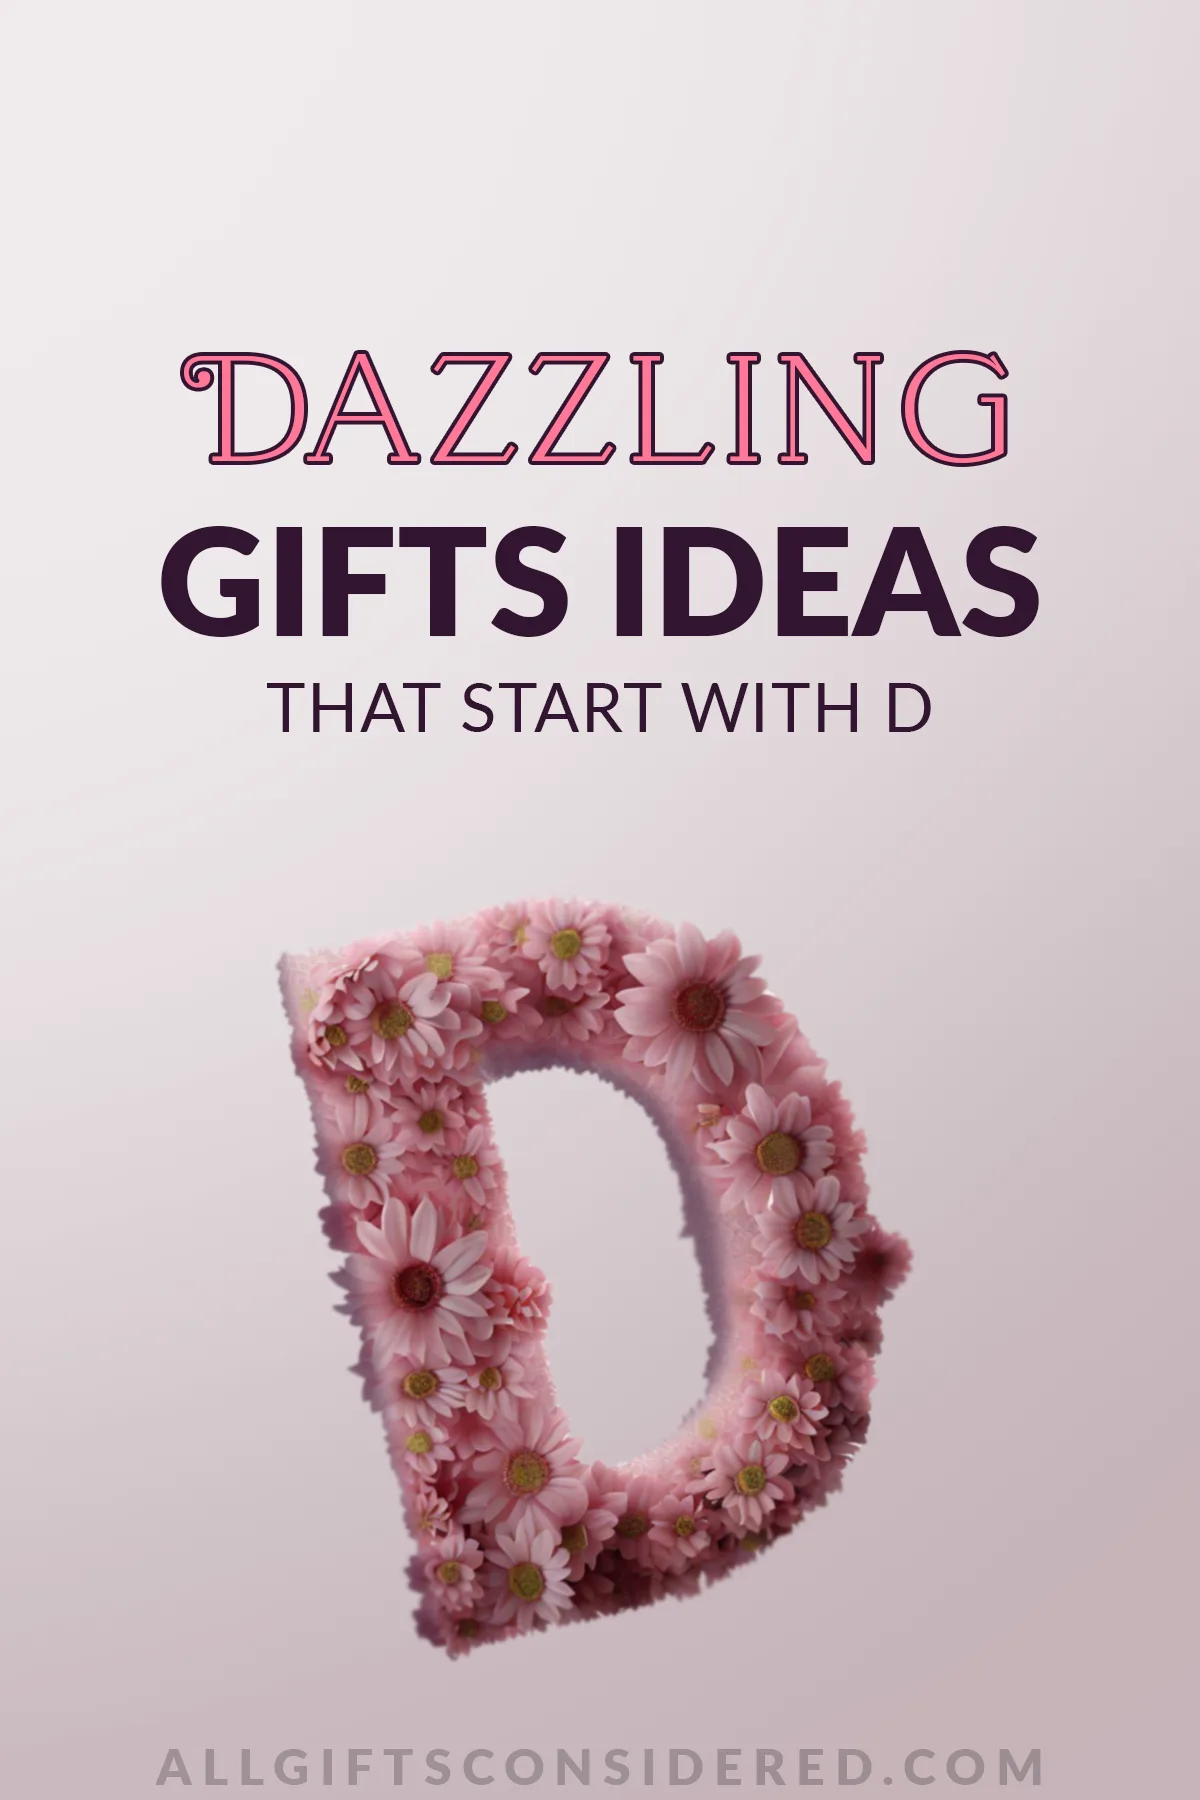 gift ideas that start with d - feature image